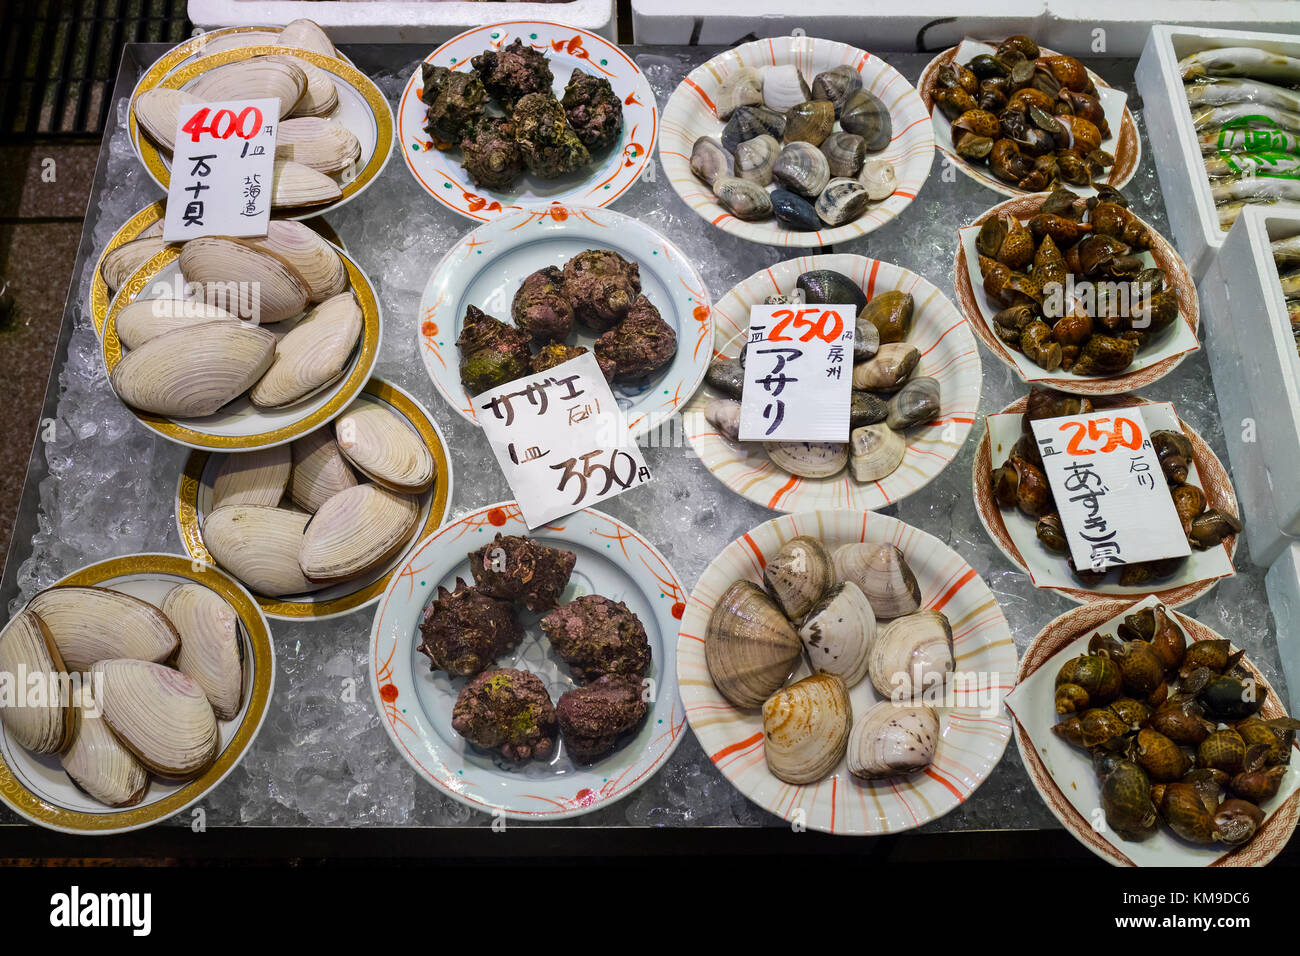 Kanazawa - Japan, June 8, 2017: Dishes with fresh diversity of sea shells on ice and price tags at the Omicho Market Stock Photo